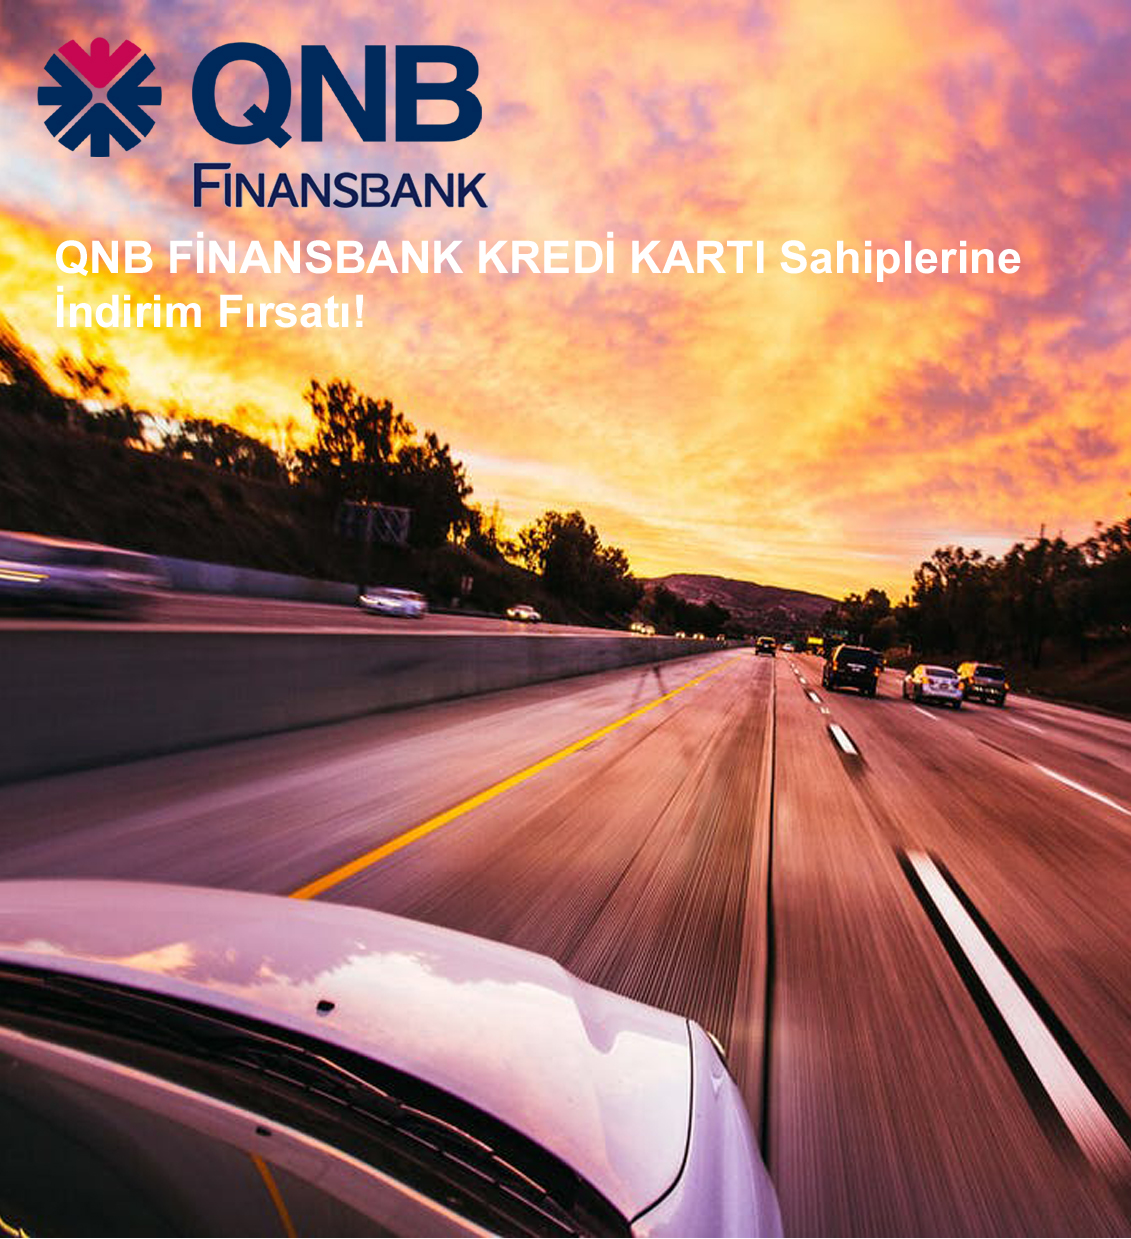 Discount Opportunity for QNB FINANSBANK CREDIT CARD Holders!